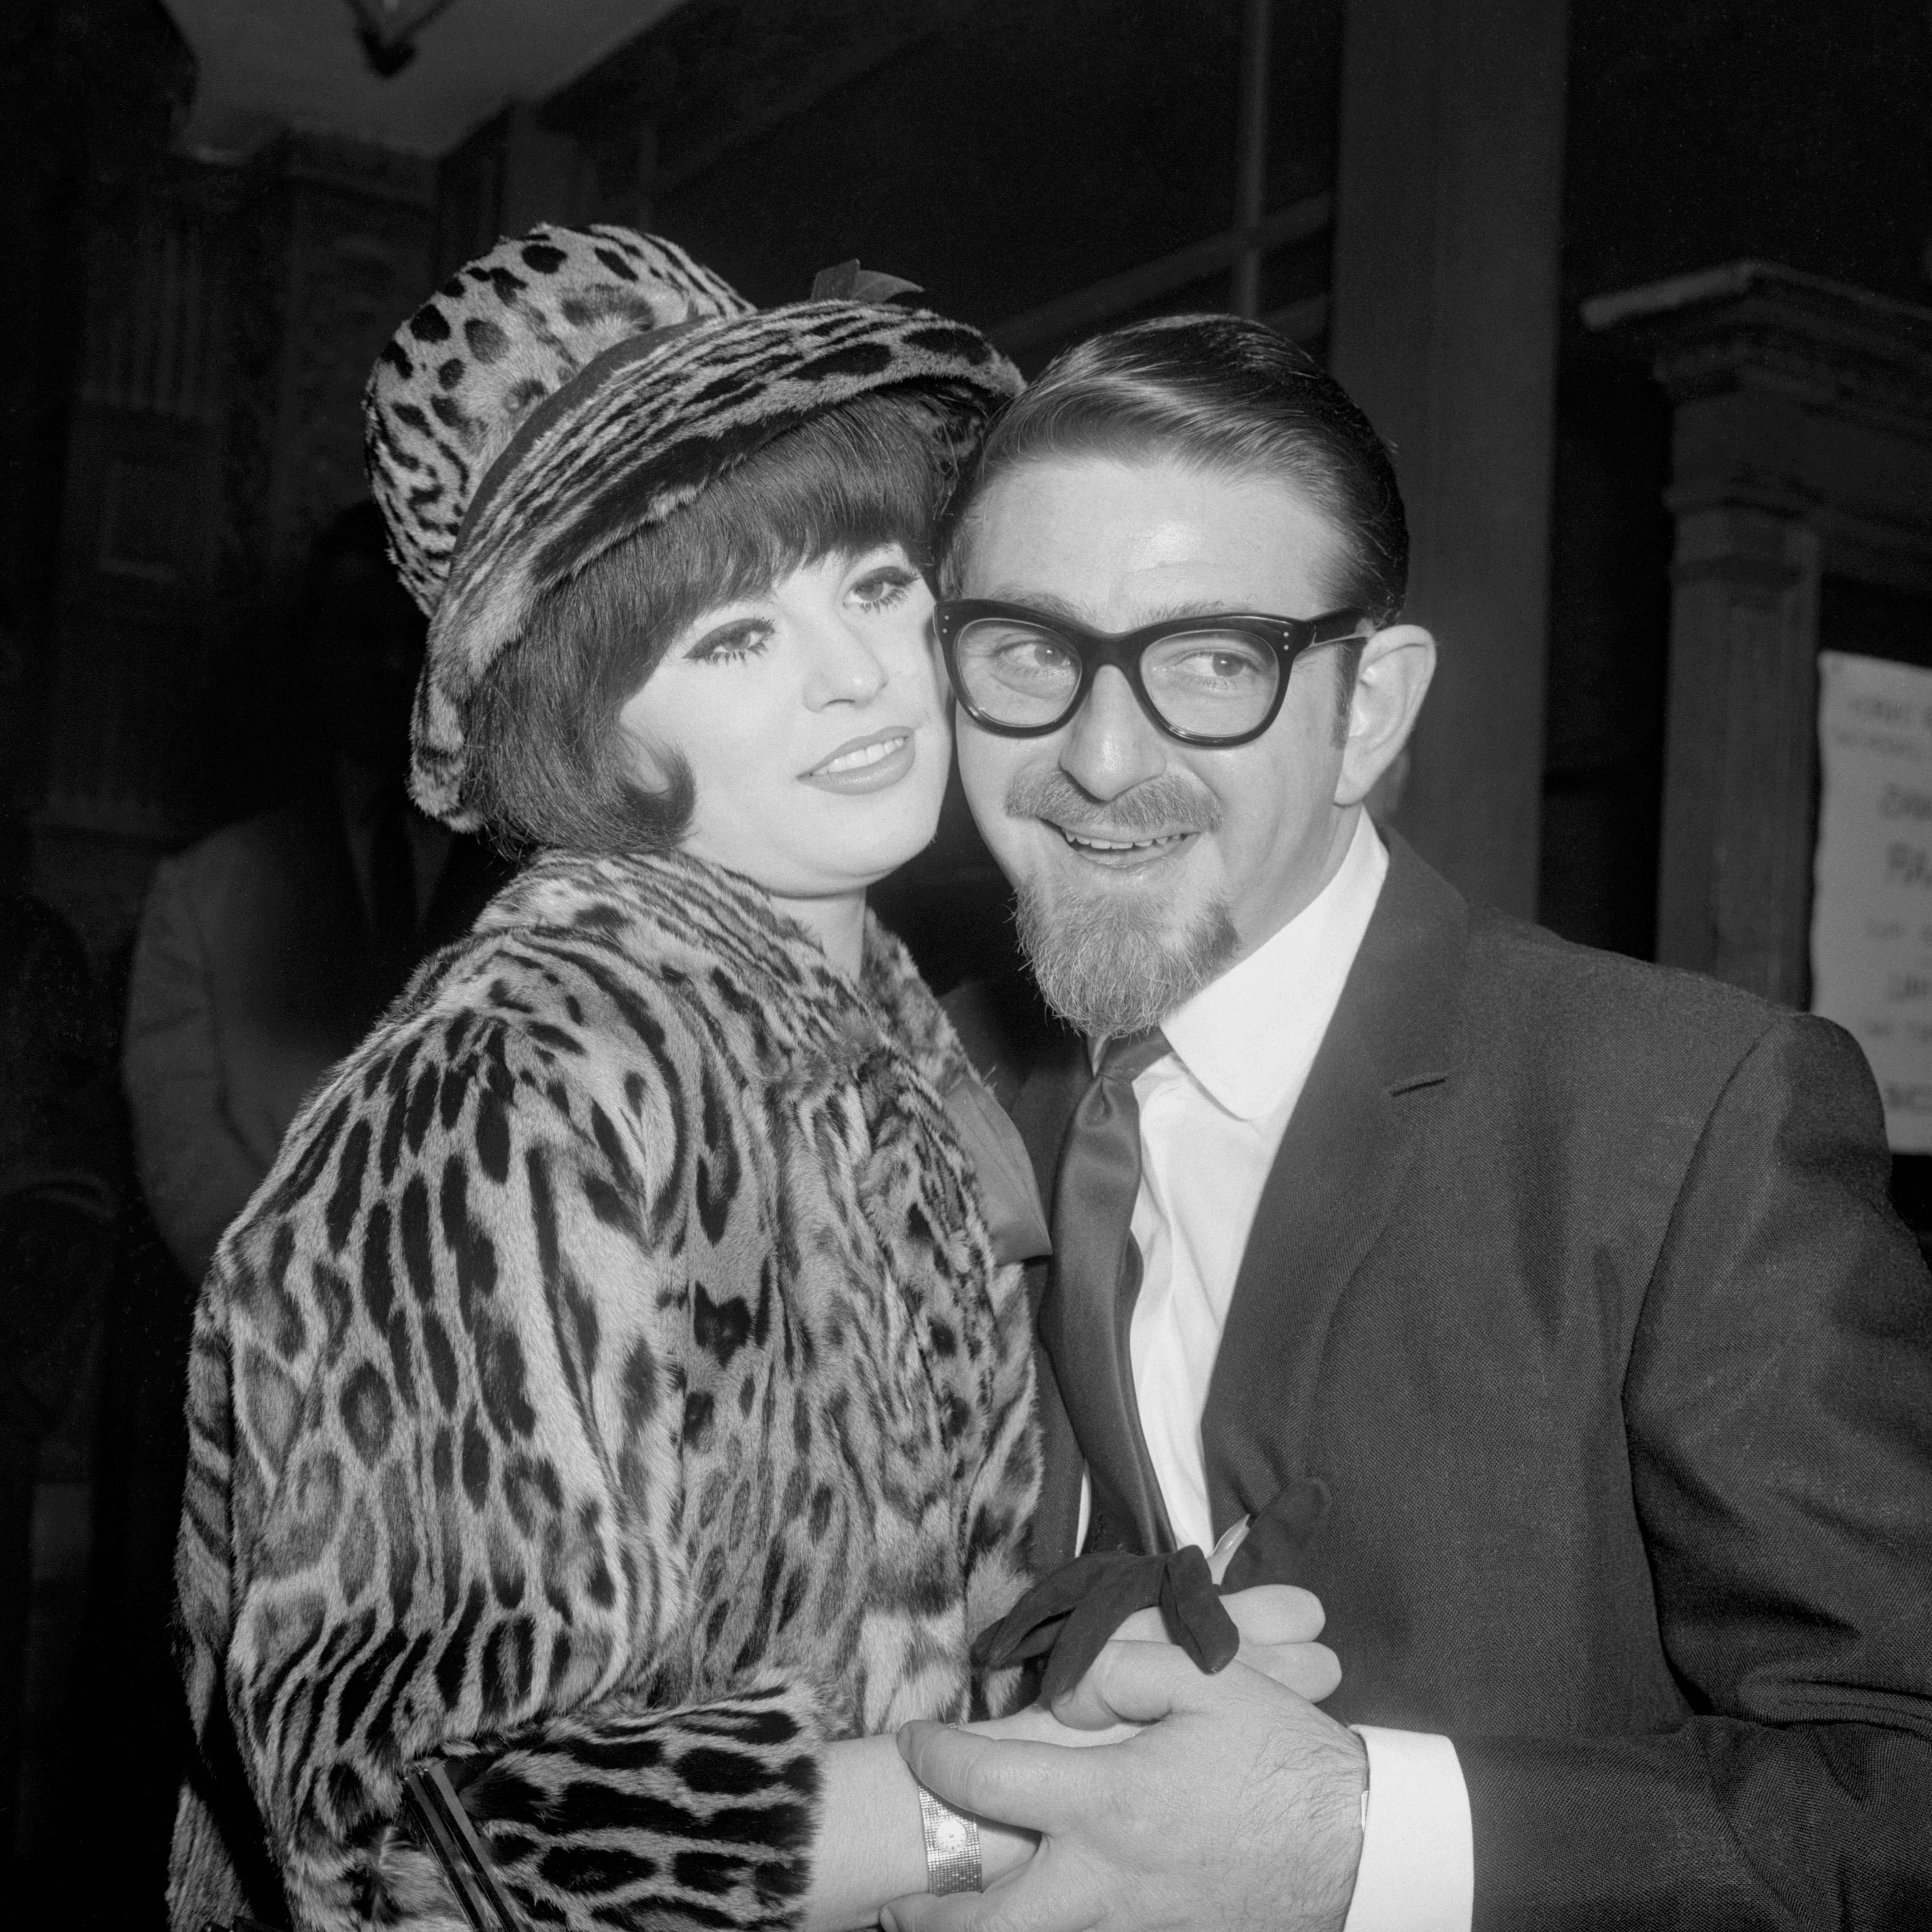 Glamour photographer Harrison Marks (r) with his bride, model Vivienne Warren (l), at Caxton Hall after their marriage on 30 November 1963.